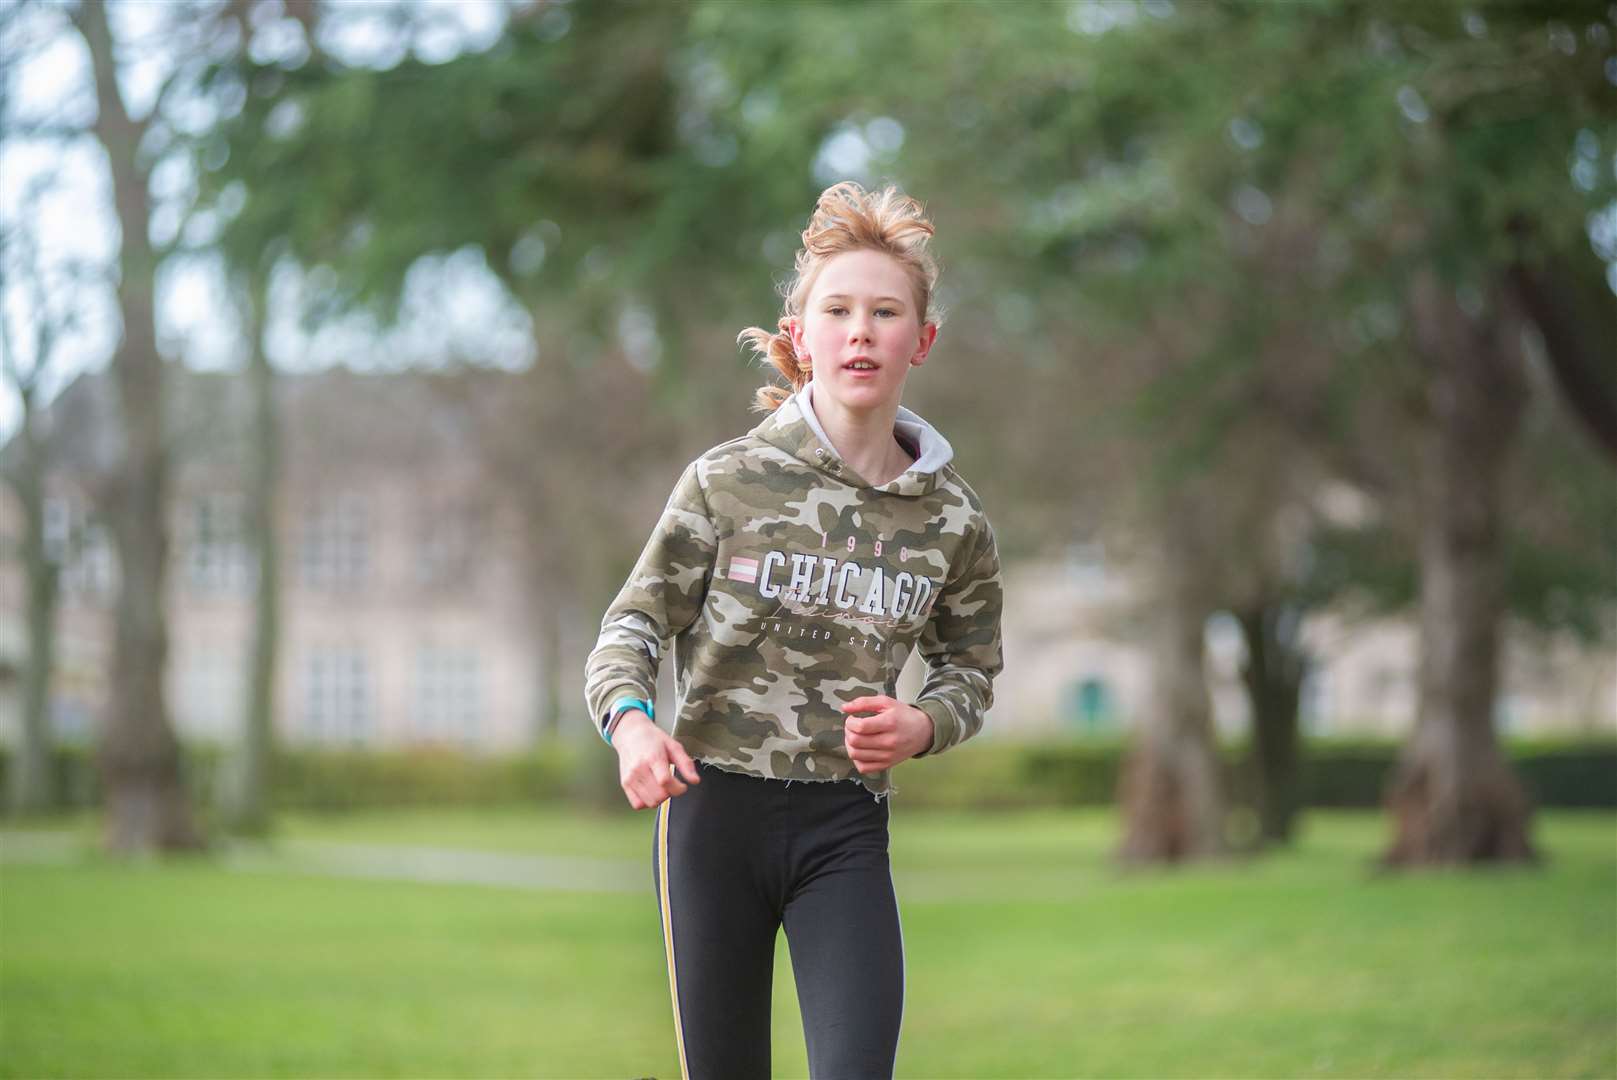 4th overall in the P6-7 Girls race was Mackenzie Dickson from Pilmuir Primary School...Forres Harriers' organised Forres Primary Schools Cross Country, held at Grant Park, Forres...Picture: Daniel Forsyth..